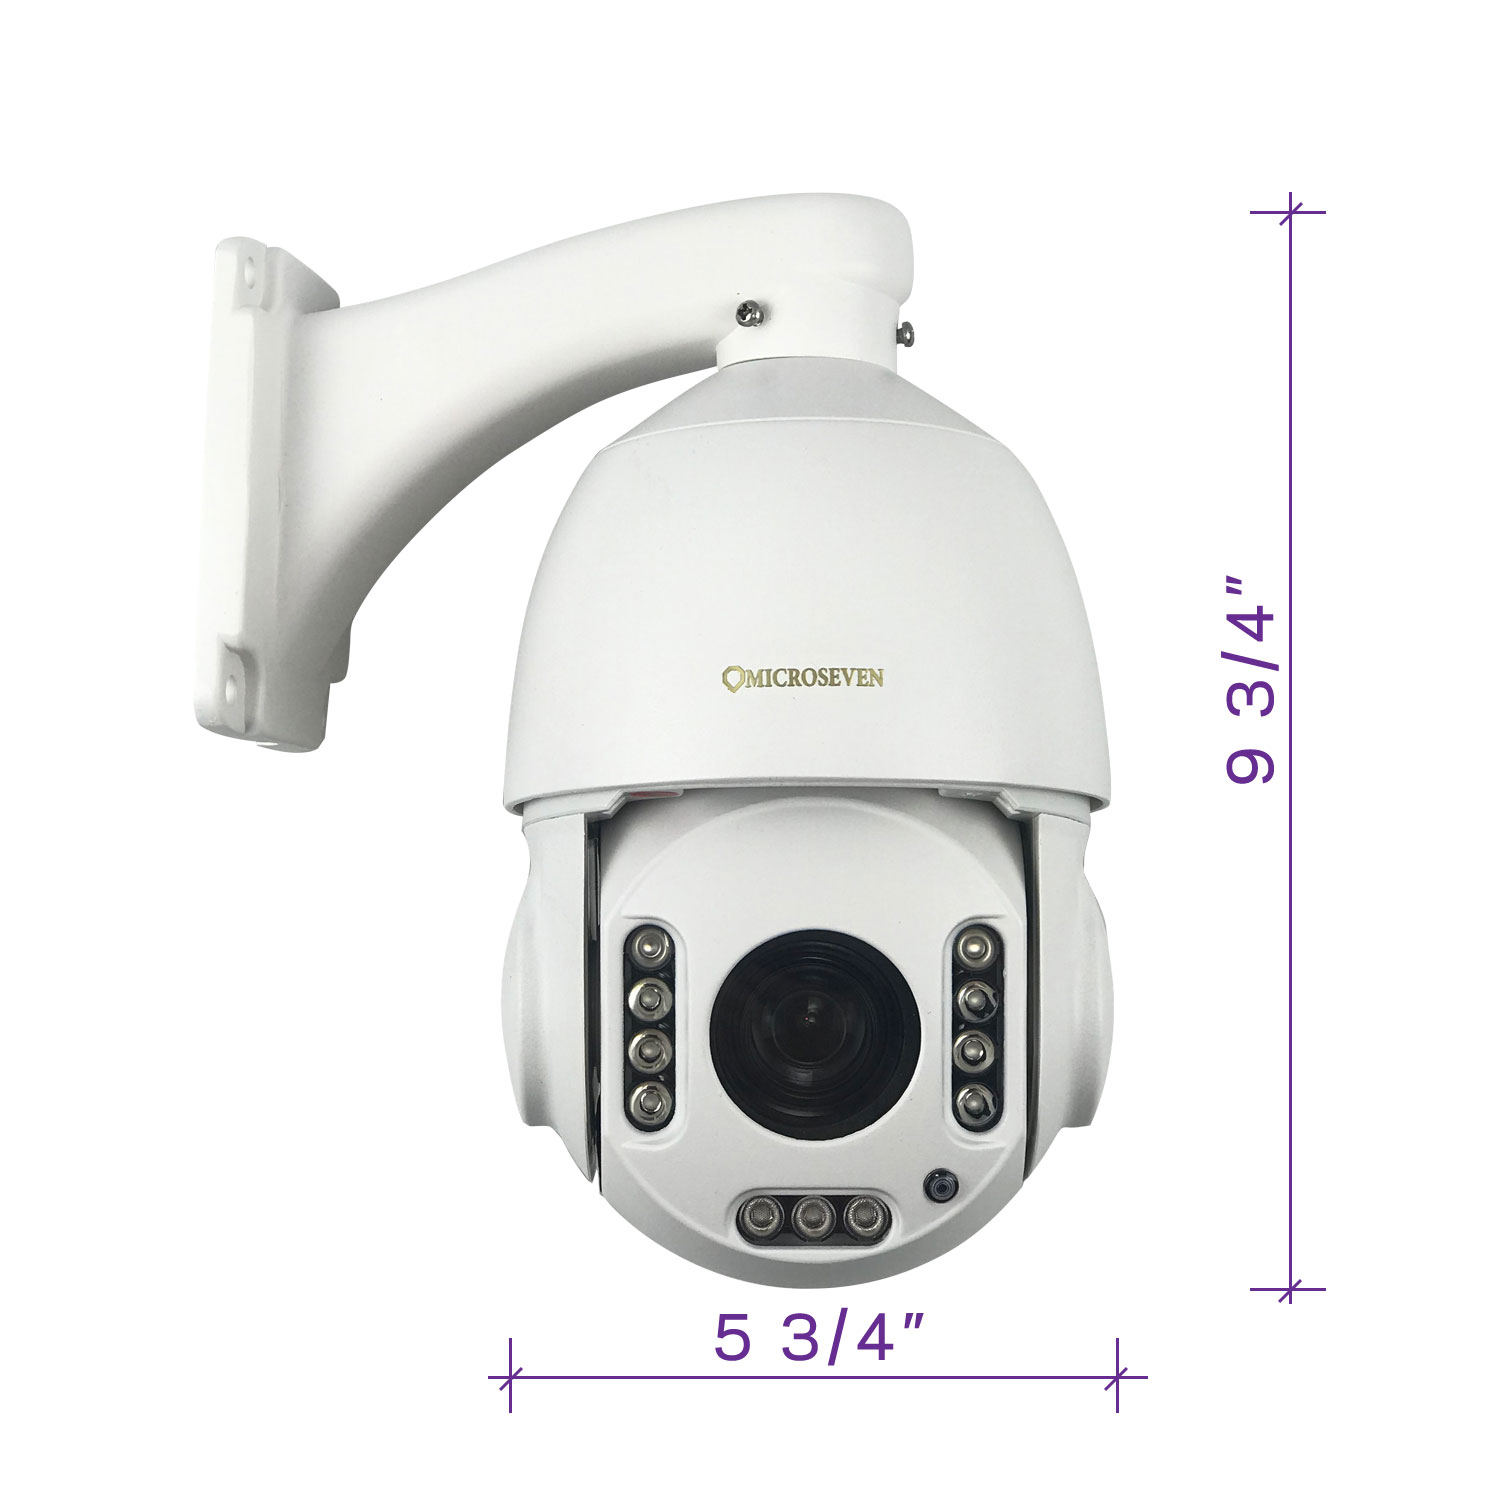 Microseven Open Source 5MP (2560x1920) UltraHD PoE+ 20X Optical Zoom Pan Tilt Speed Dome IP Camera, Human Motion Detection & Auto Tracking, Indoor / Outdoor PTZ Camera, Works with Alexa with No Monthly Fee, Day & Night,Sony Starvis CMOS,IP66 Weatherproof, Built-in 128GB SDcard Slot, Two-Way Audio with Build-in Microphone & External Speaker (Included), Auto Cruise,ONVIF, Web GUI & Apps, VMS (Video Management System), Free 24Hr Cloud Storage + Broadcasting on YouTube,Facebook & Microseven.tv